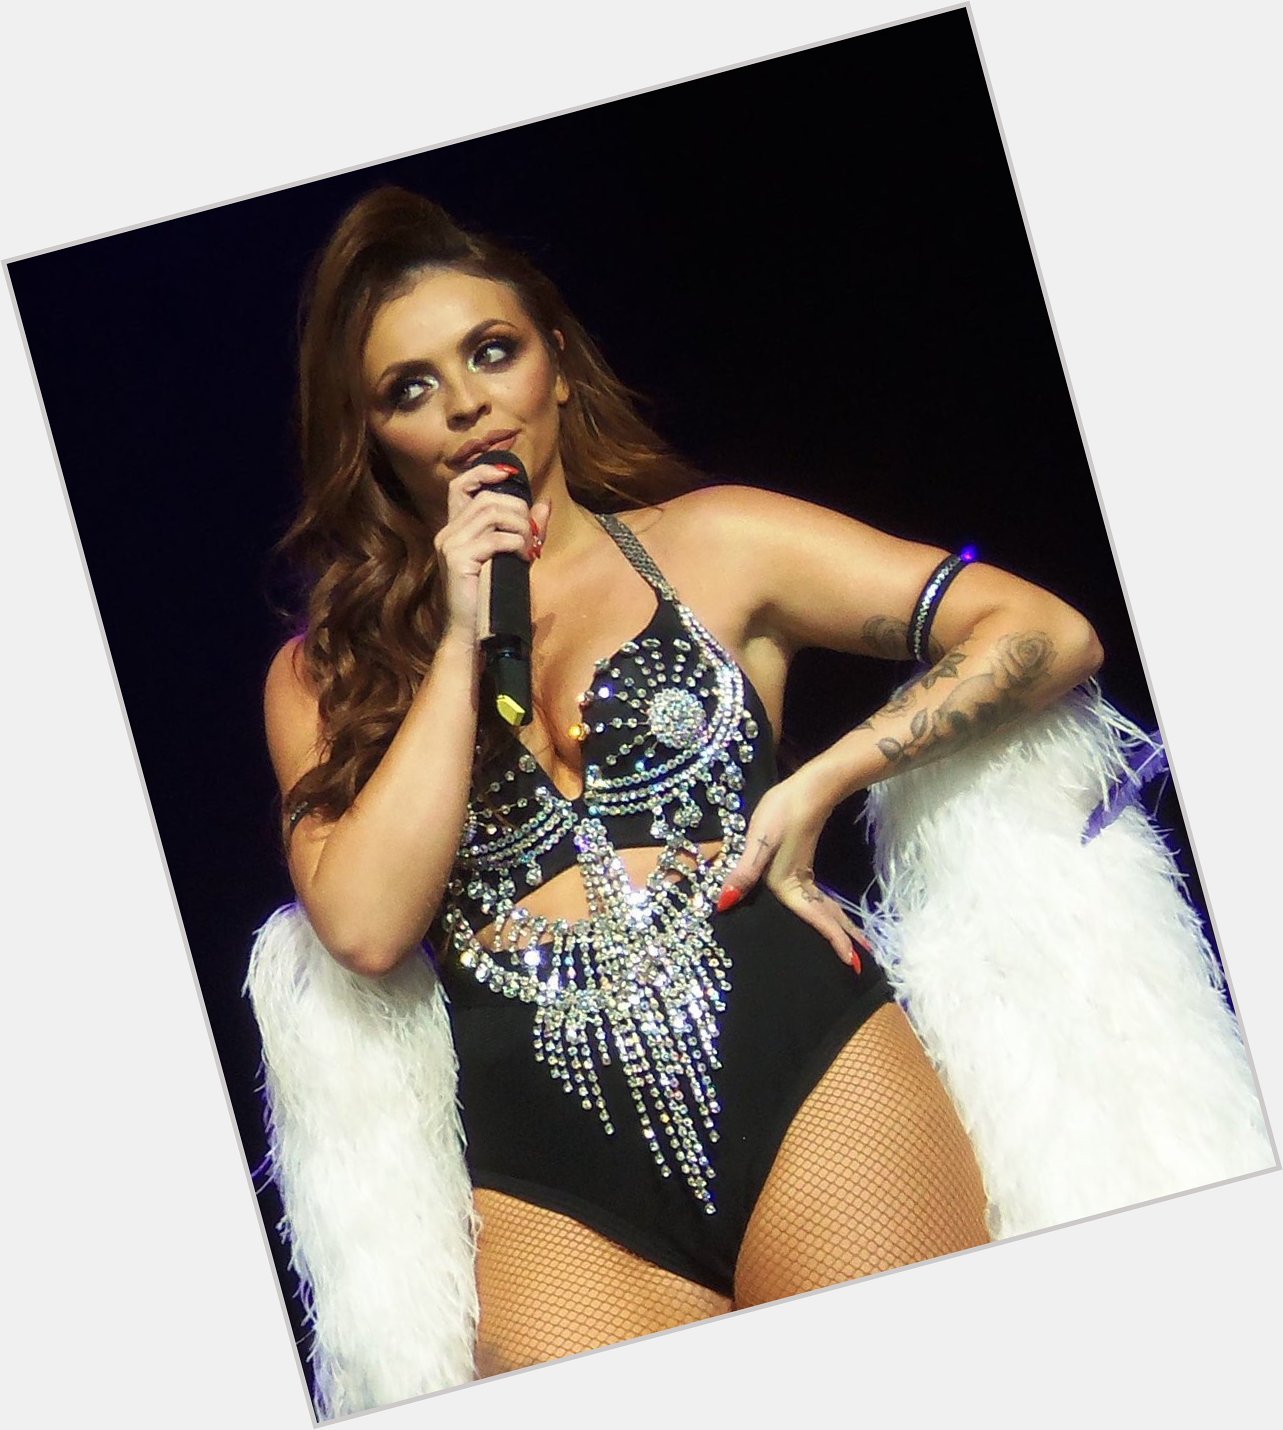 Happy birthday to the beautiful legend jesy nelson. Have the bestest day angel   